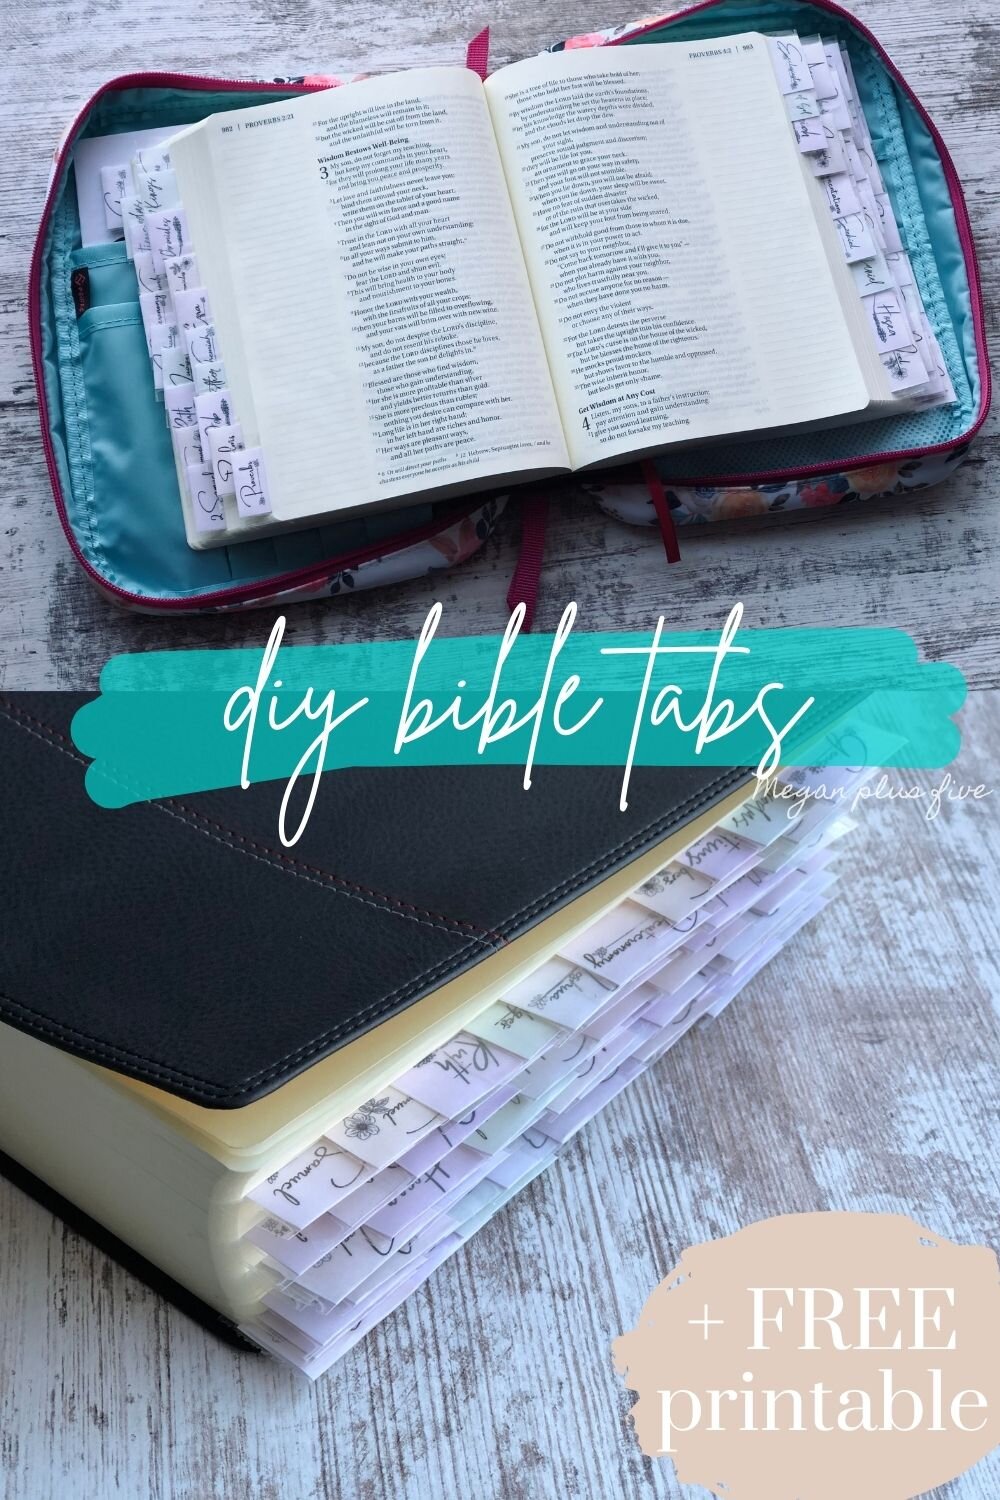 DIY bible tab printable. How to make your own bible tabs cheap and easy. Frugal mom printable. Pretty bible tab printable that are free to use.